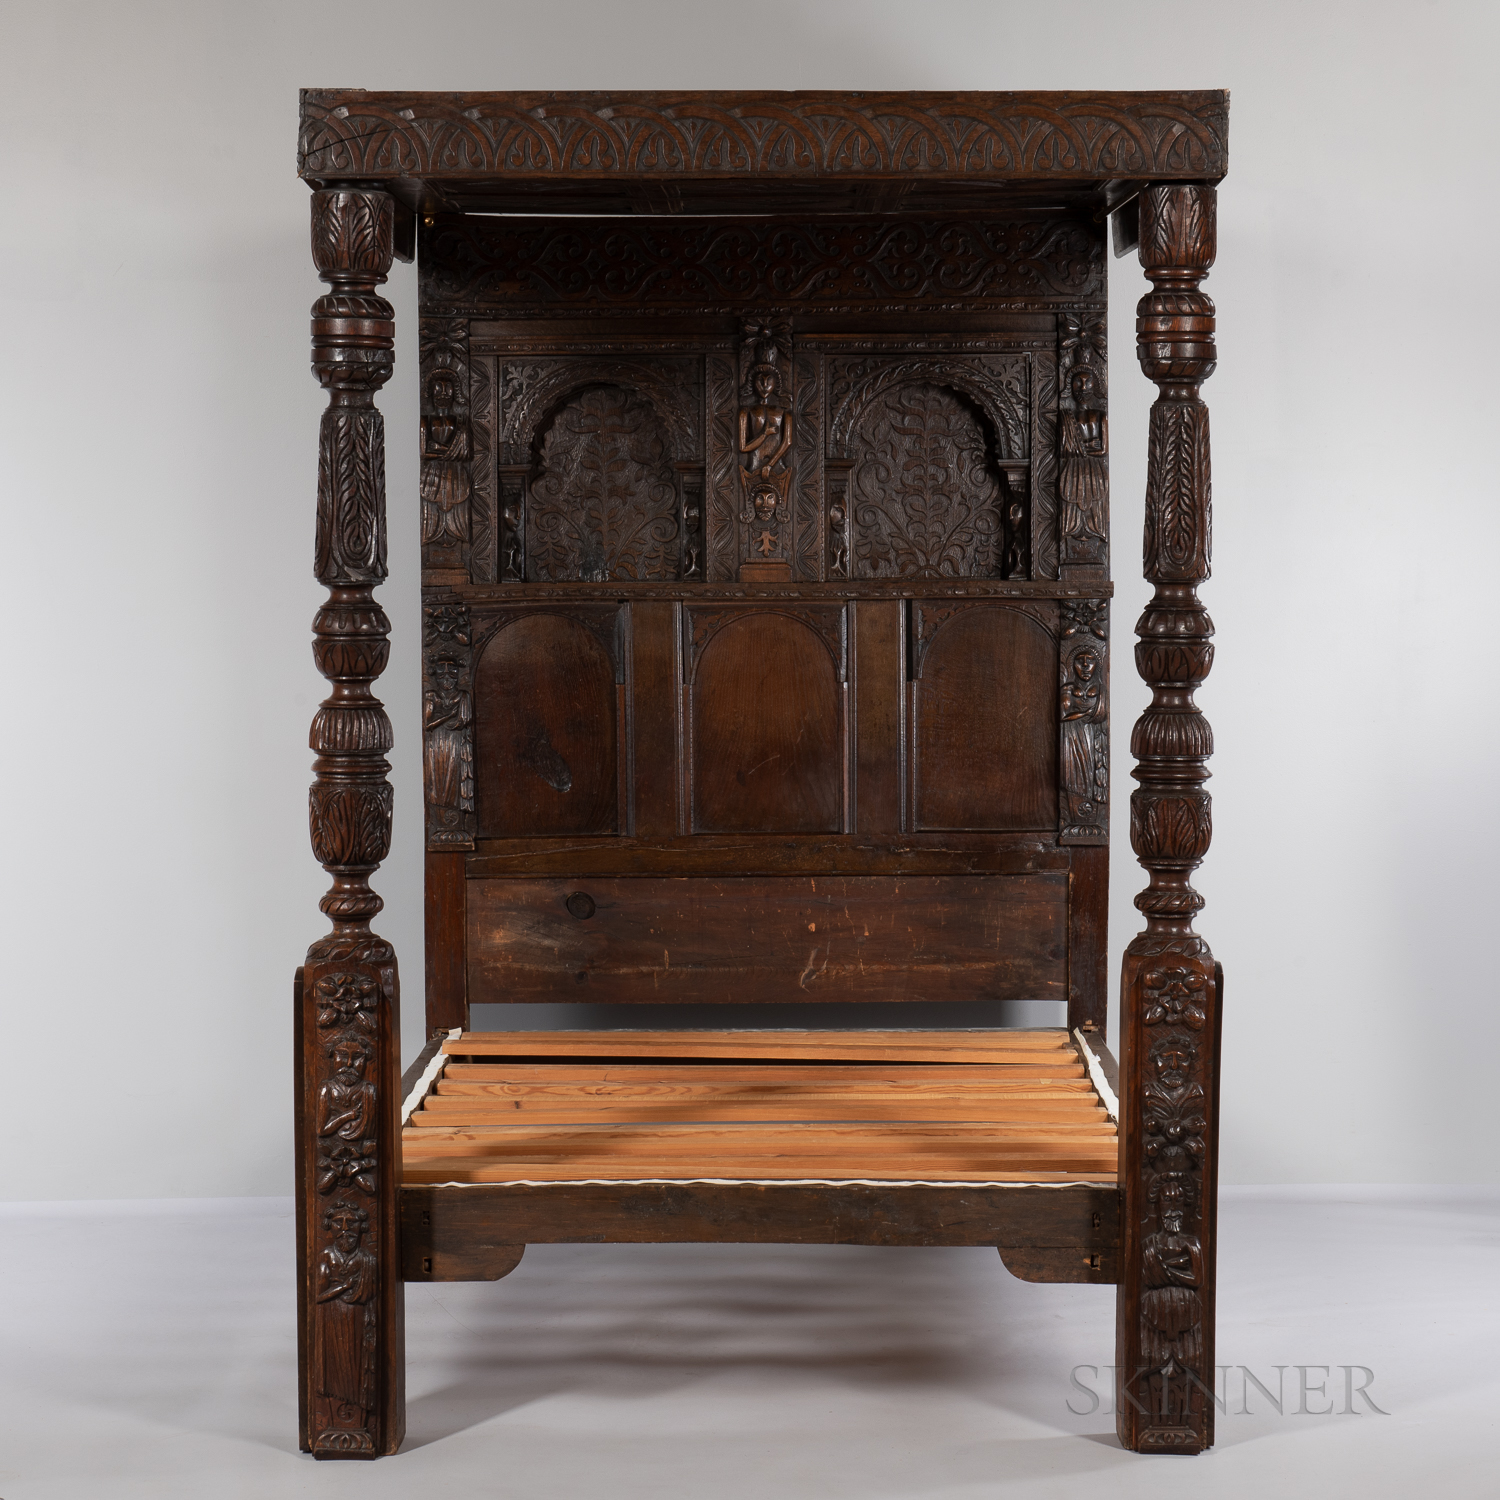 Jacobean-style Carved Oak Tester Bed - Image 8 of 8